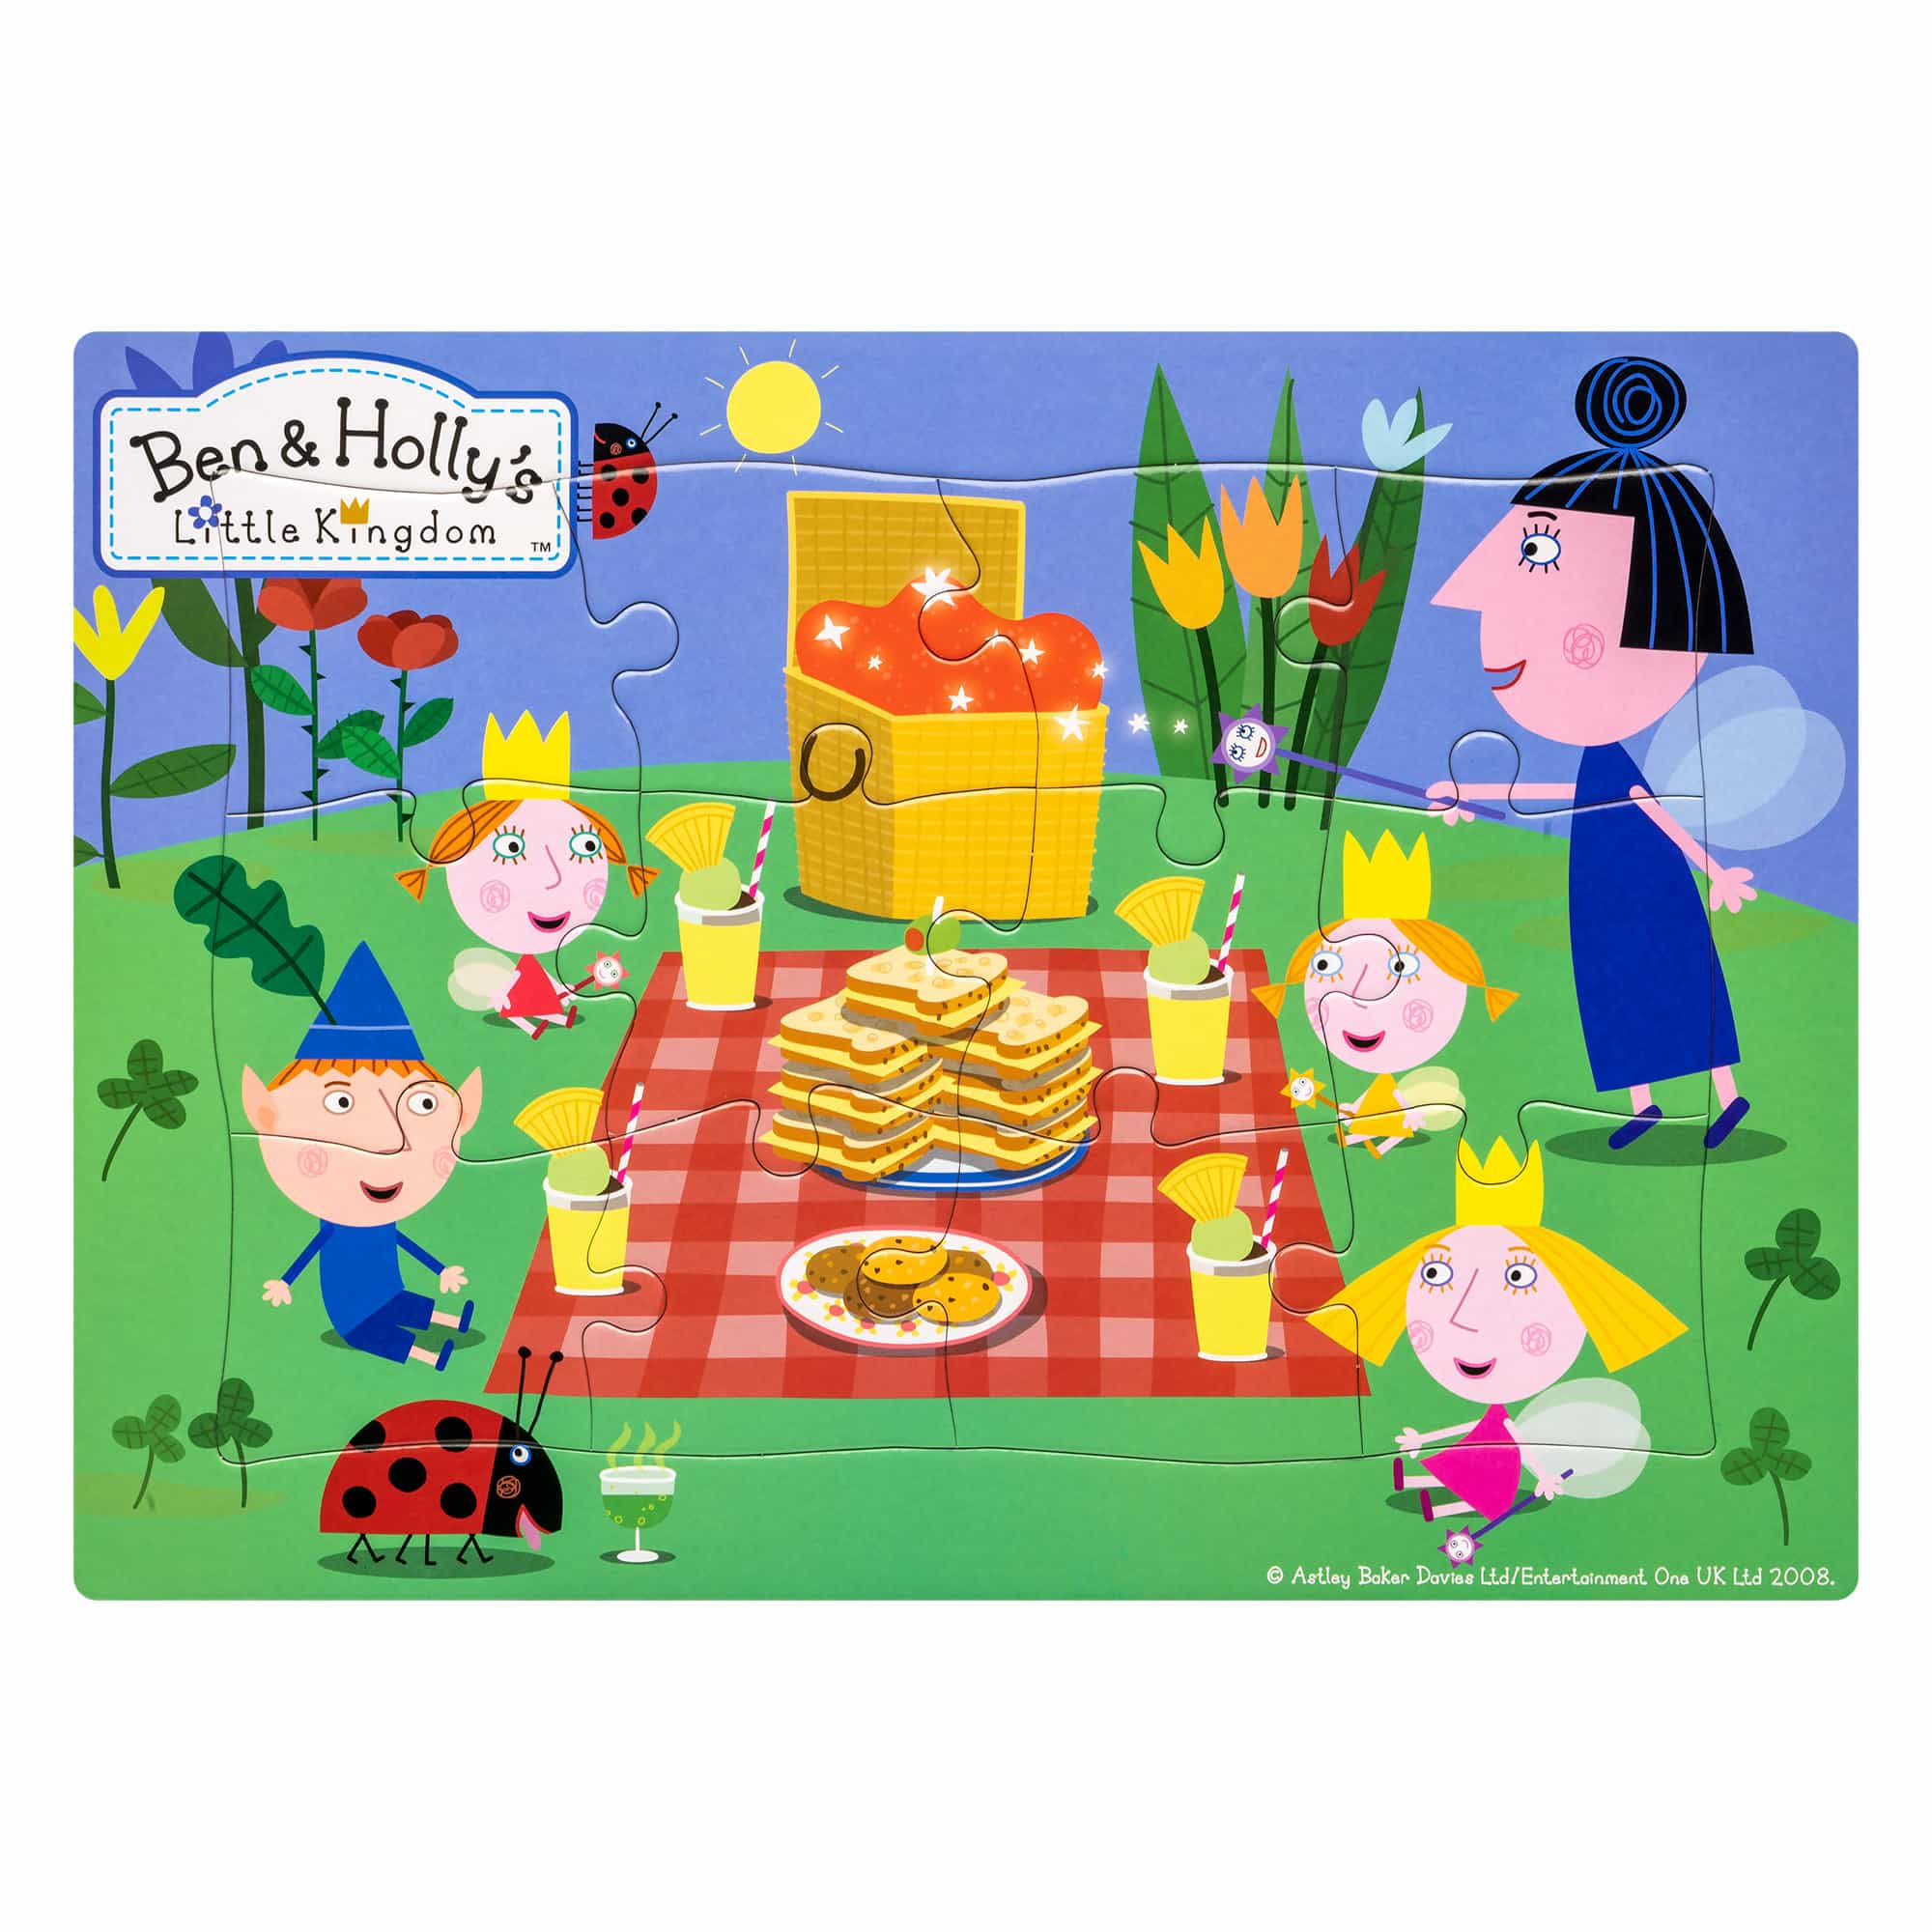 Ben & Holly's Little Kingdom - 12 Piece Frame Tray Puzzle - Picnic Time